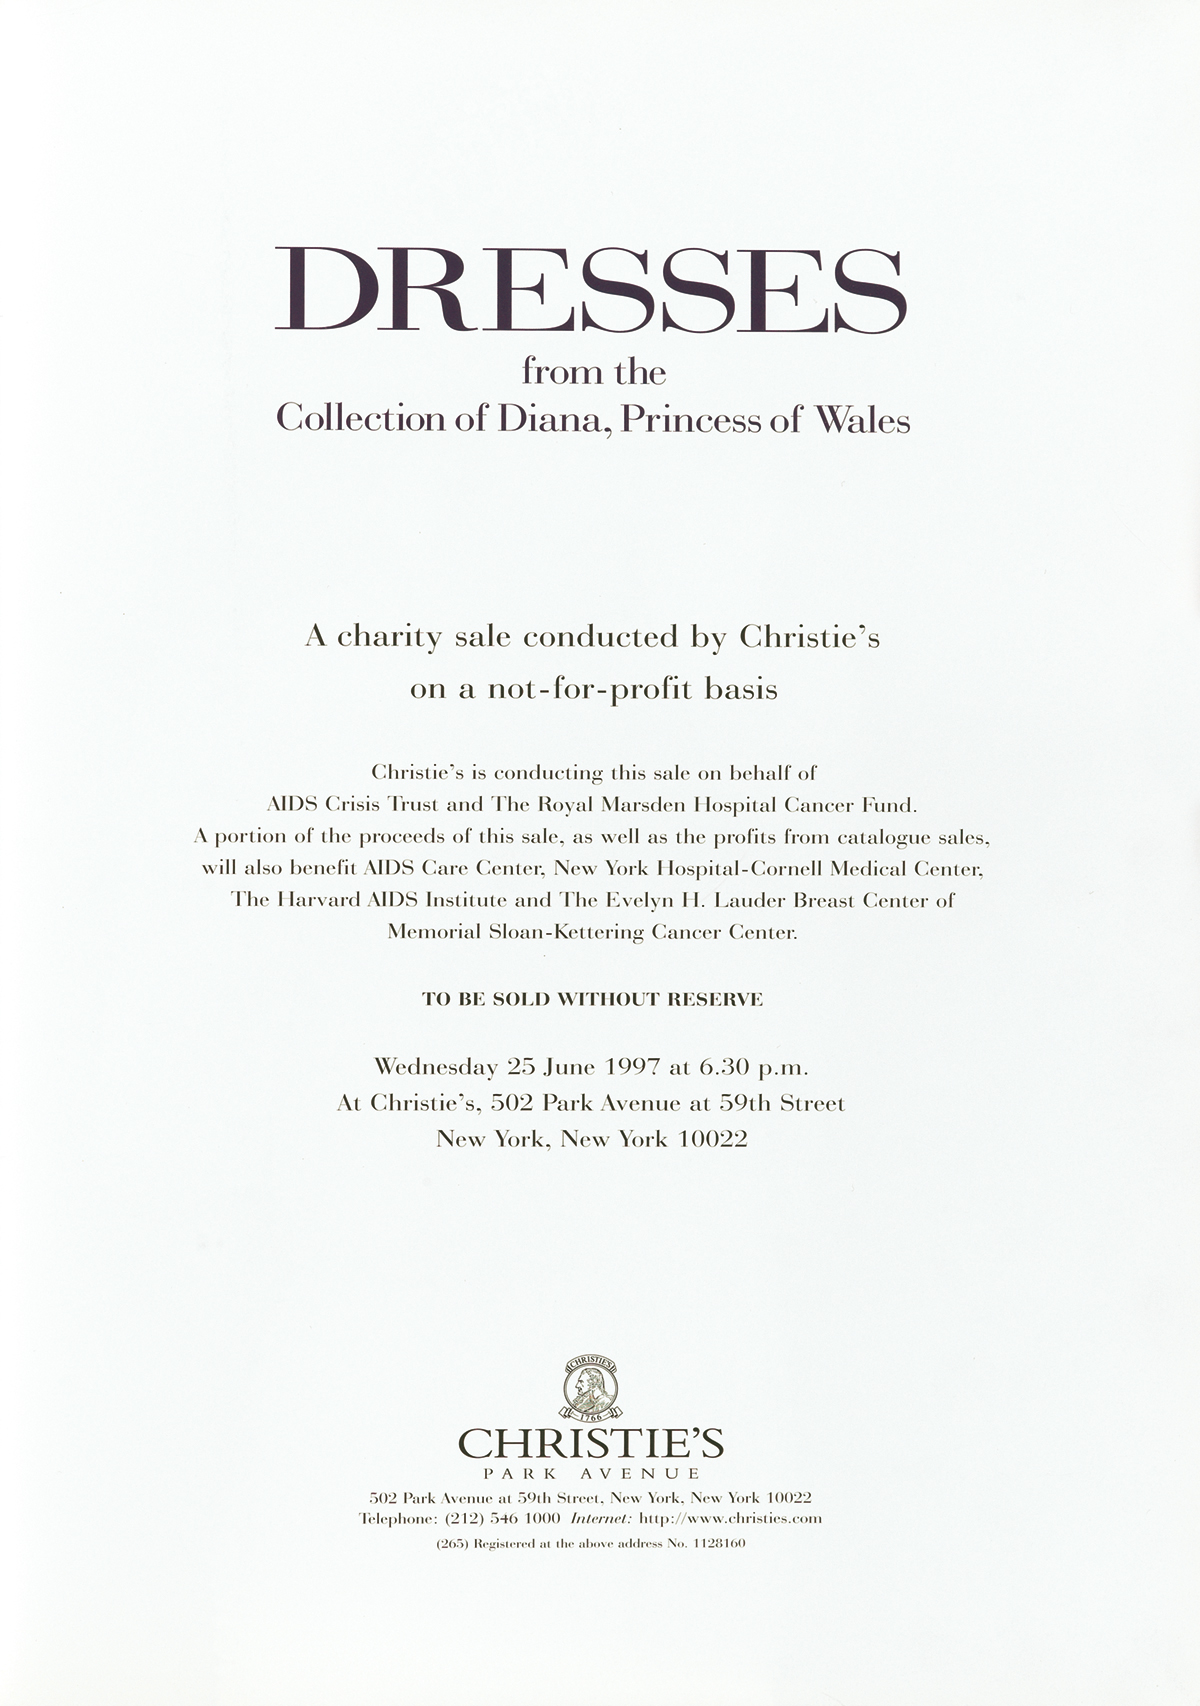 DIANA; PRINCESS OF WALES. Dresses from the Collection of Diana, Princess of Wales. Signed, Diana, on the half-title.